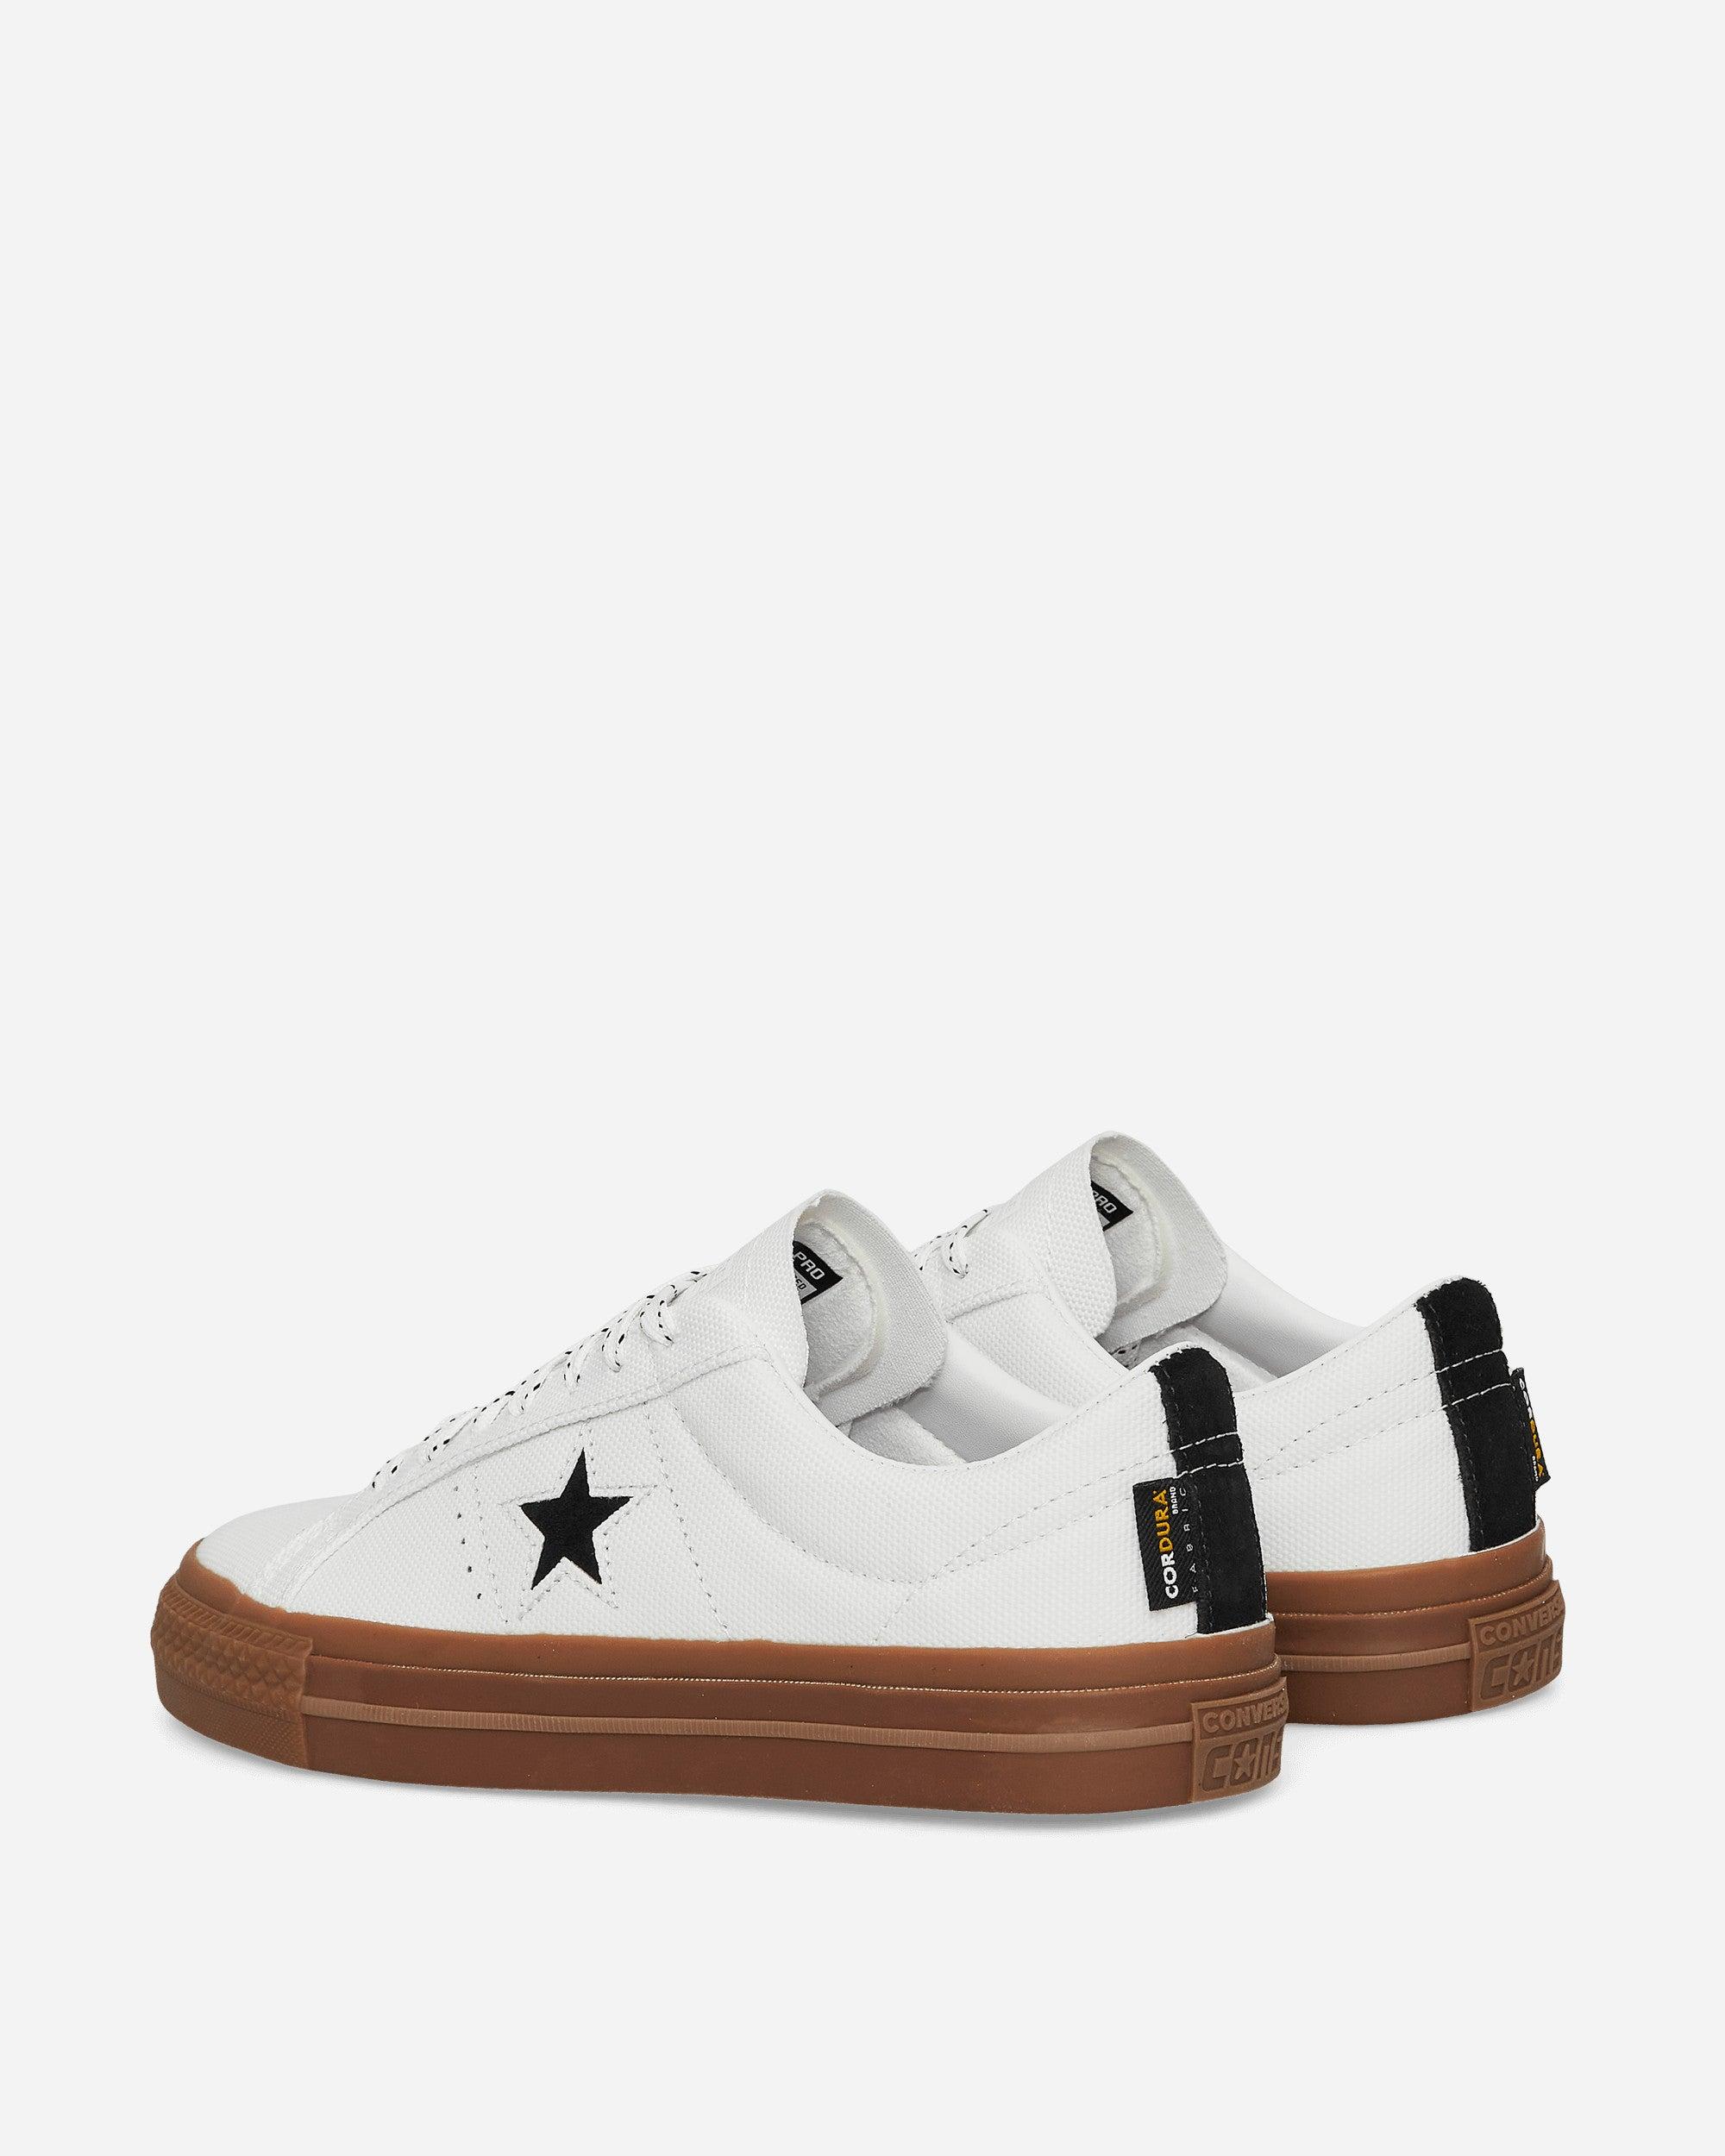 Converse One Star Pro Cordura Canvas Sneakers White for Men | Lyst